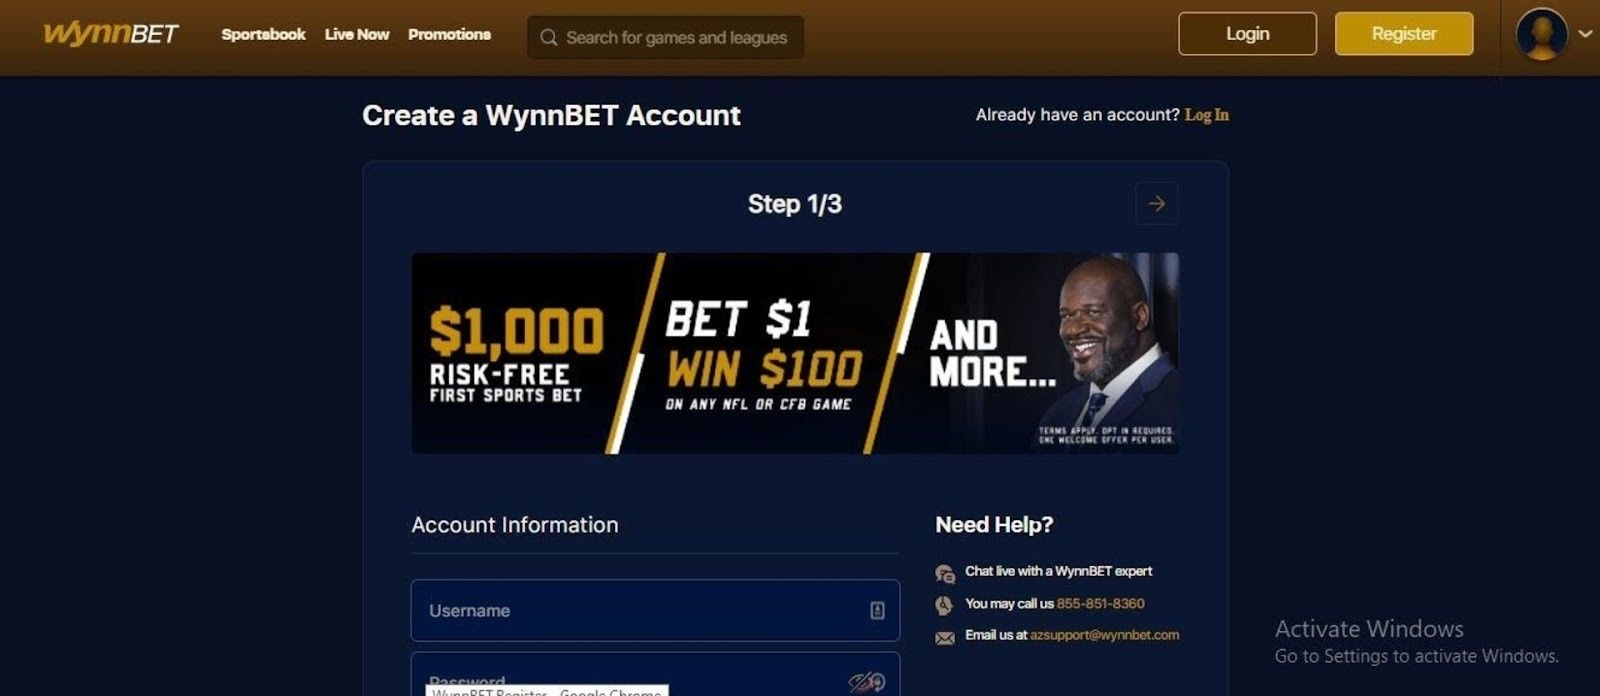 Registration section of the Wynn Sports betting site